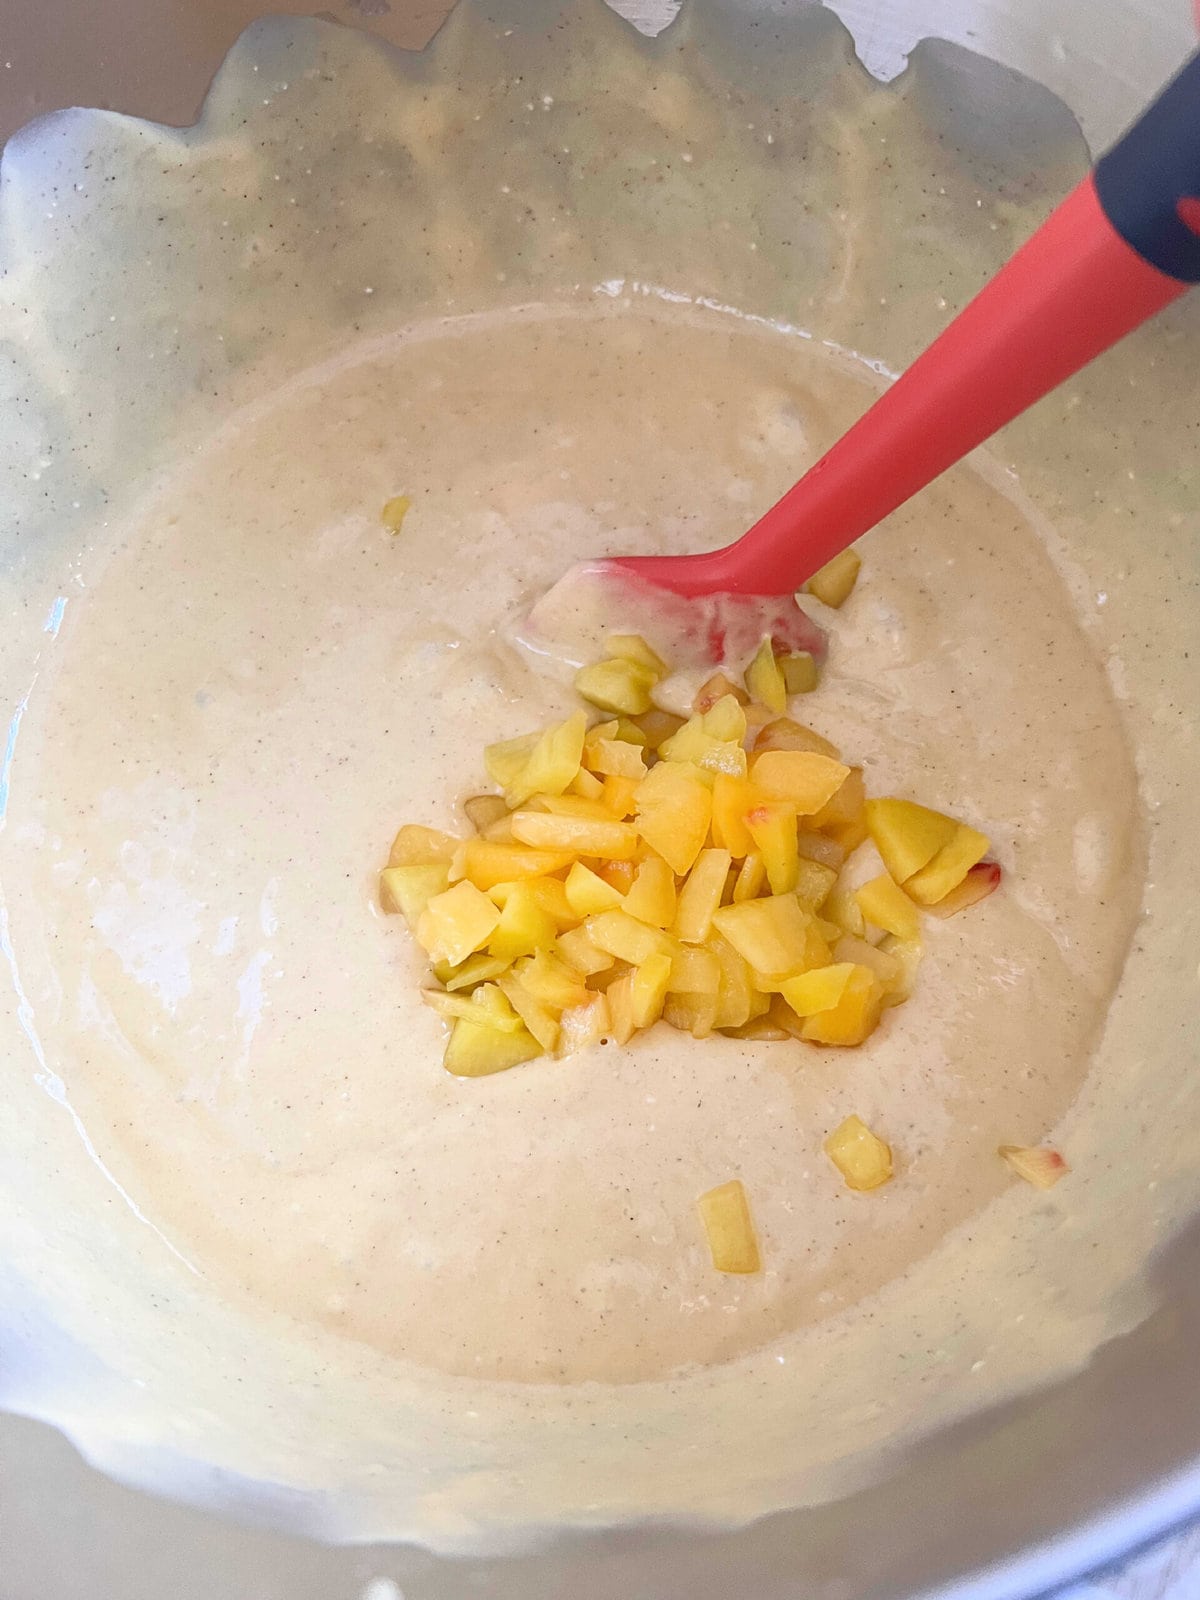 Folding finely chopped peaches into cake batter.